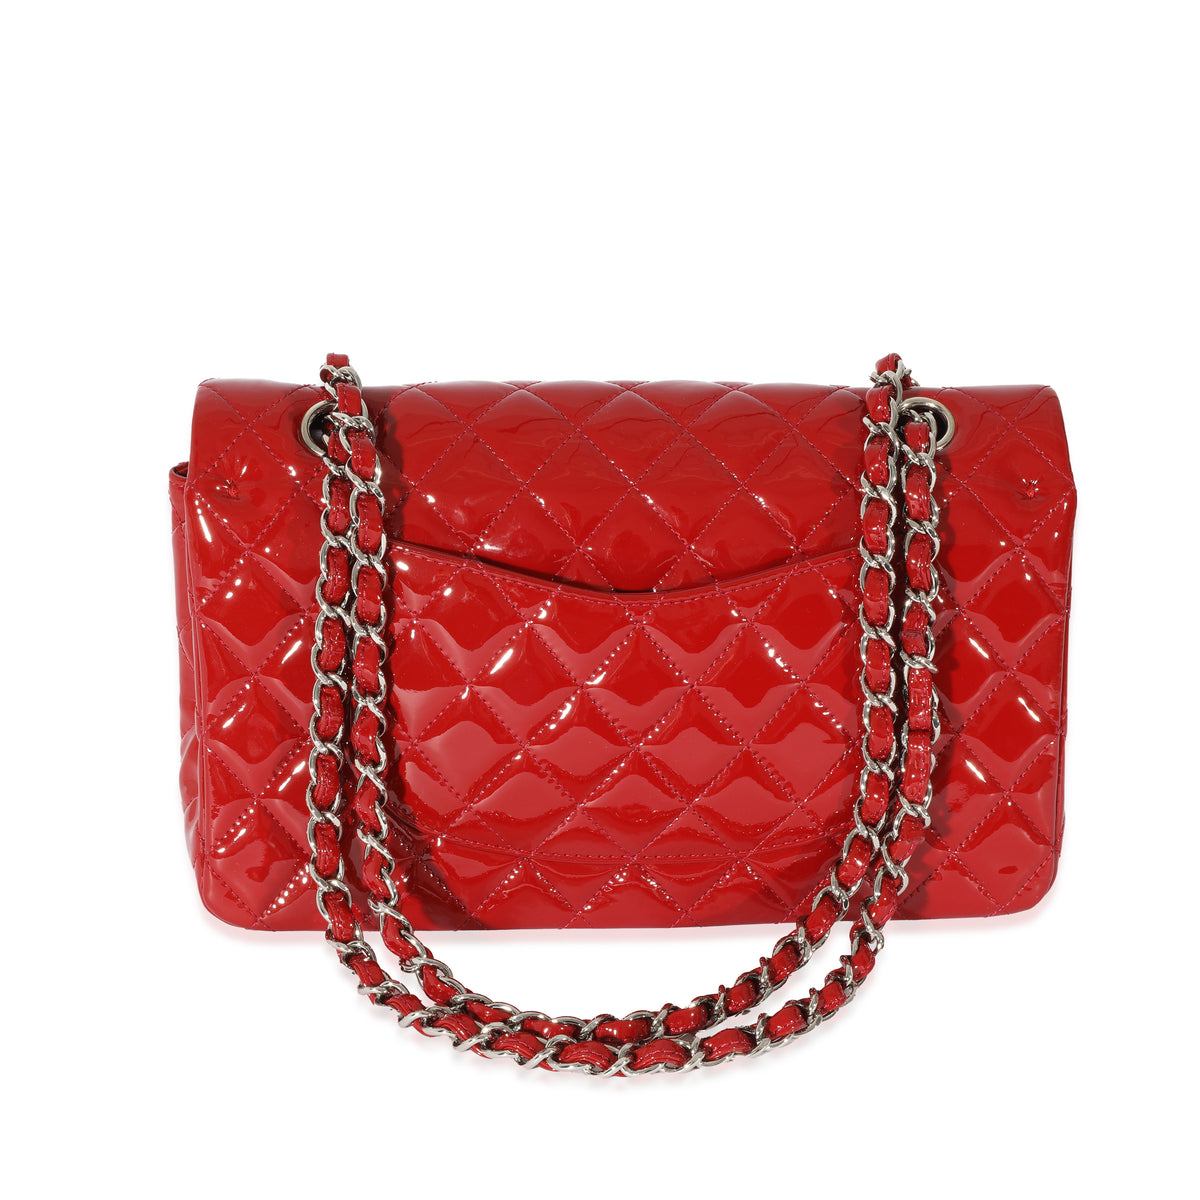 Cra-wallonieShops Revival  Chanel Pre-Owned 1995 quilted Double